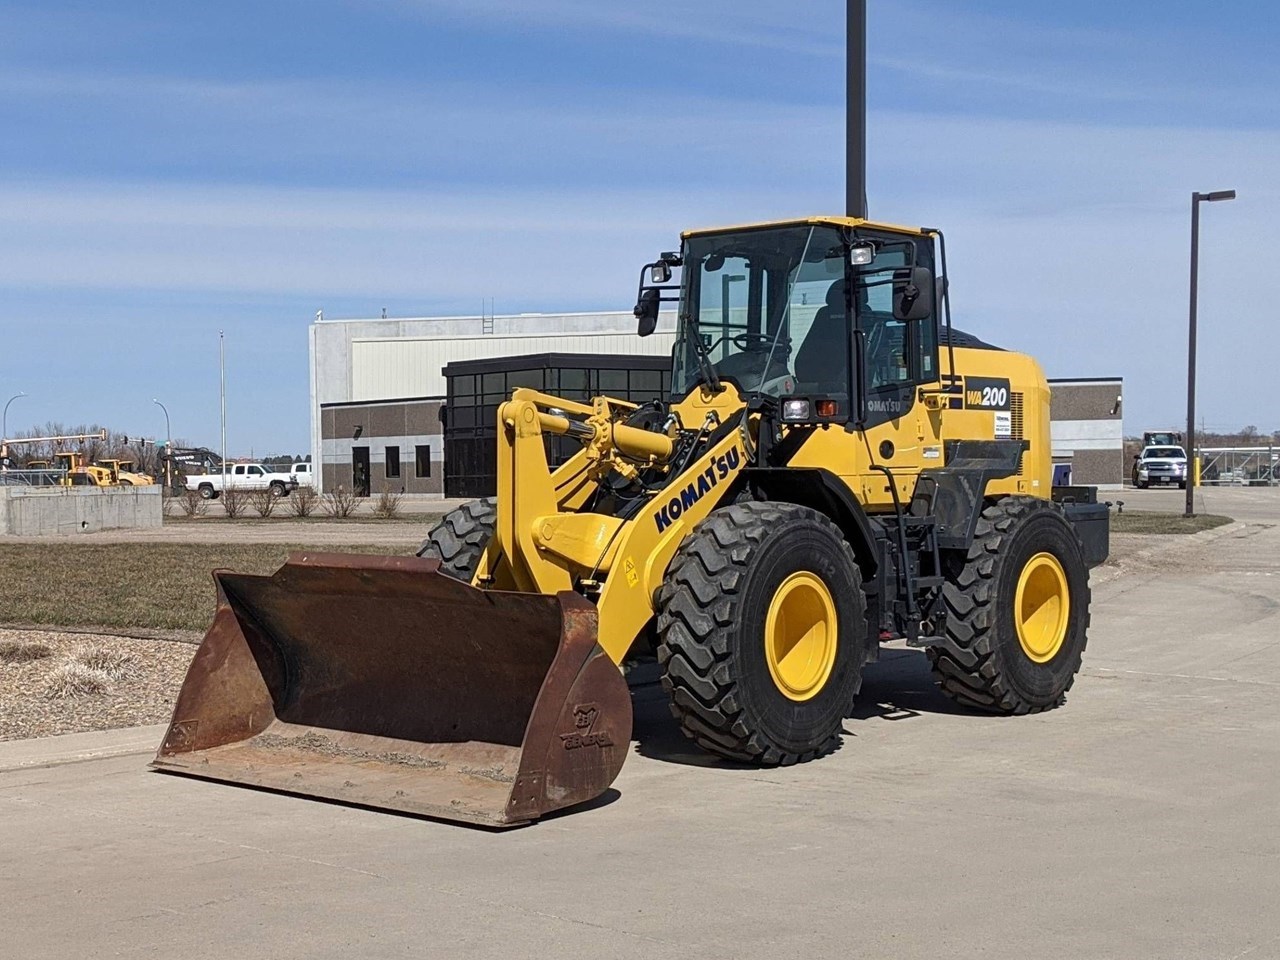 Loaders For Sale » General Equipment & Supplies, Inc.